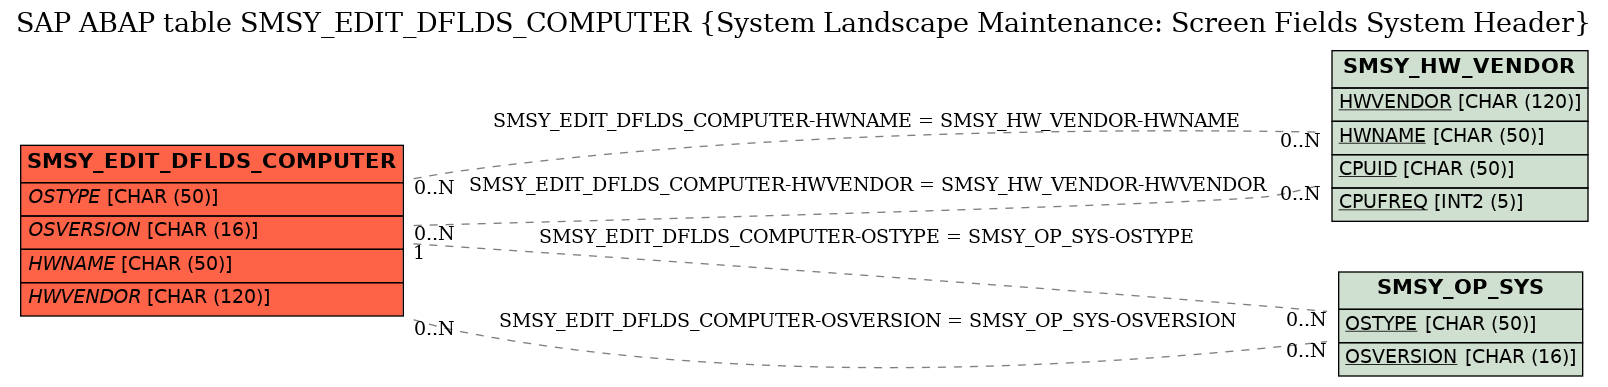 E-R Diagram for table SMSY_EDIT_DFLDS_COMPUTER (System Landscape Maintenance: Screen Fields System Header)